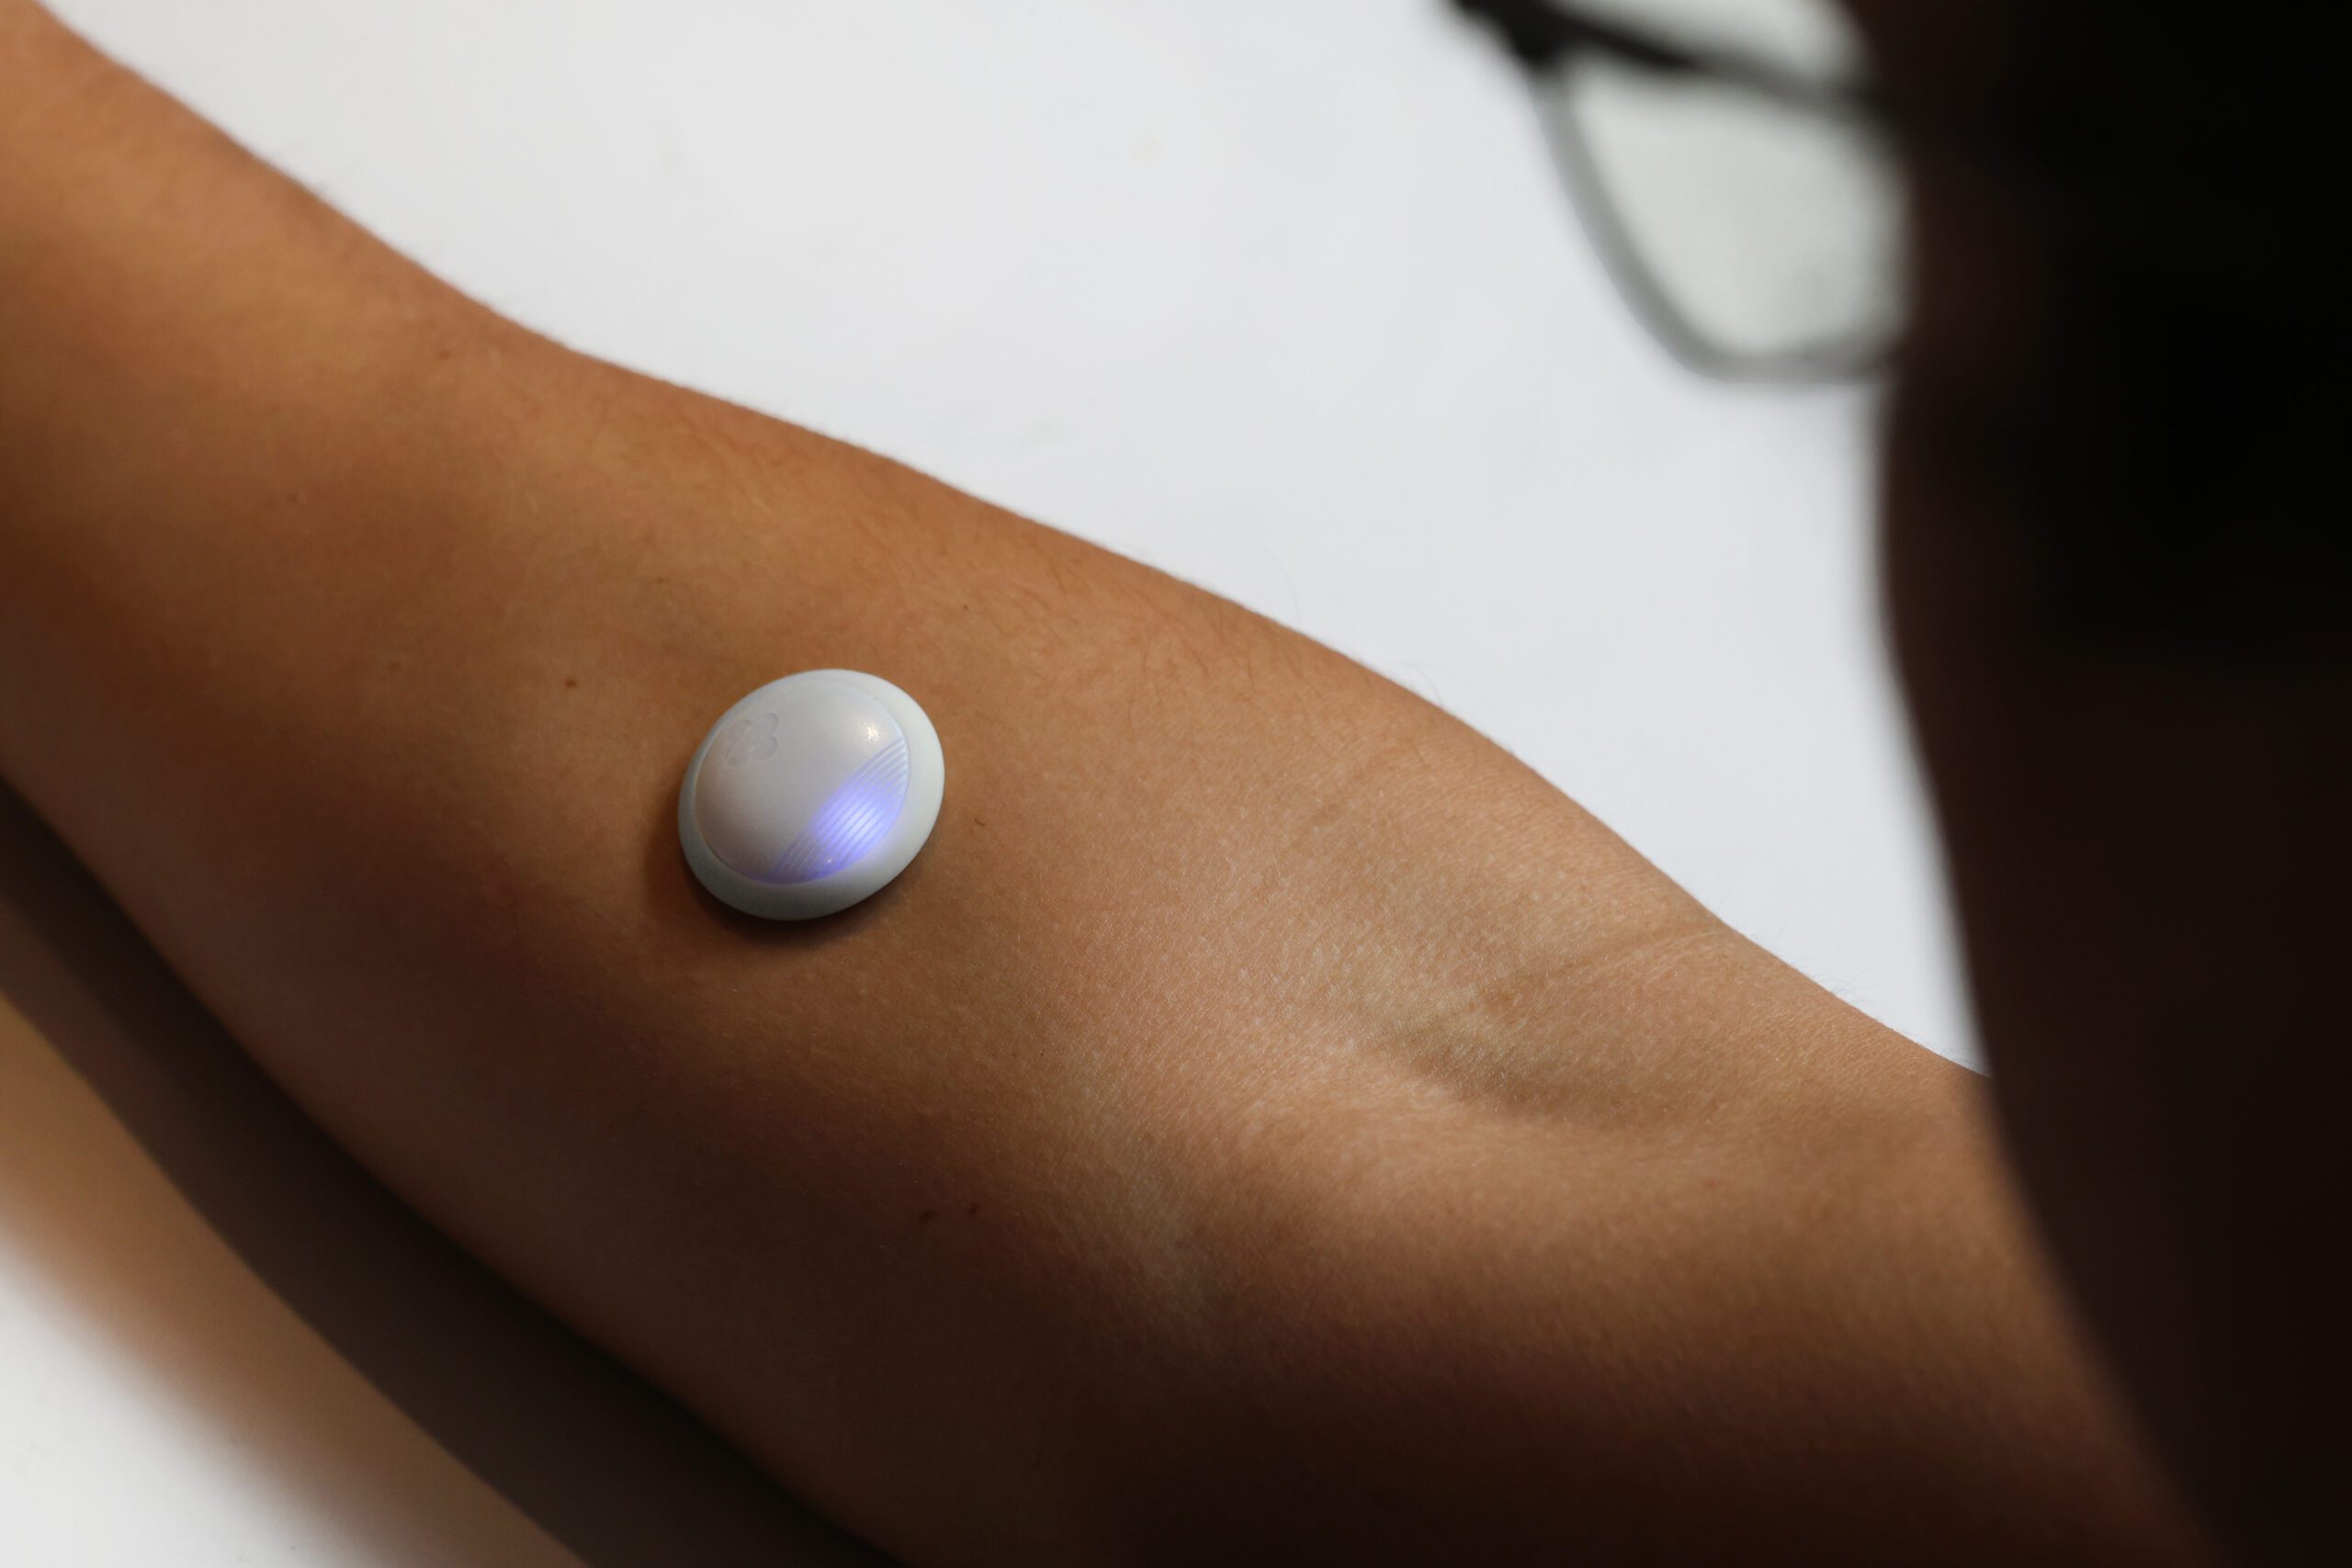 Biolinq Secures $58M to Advance Continuous Glucose Monitoring Patch